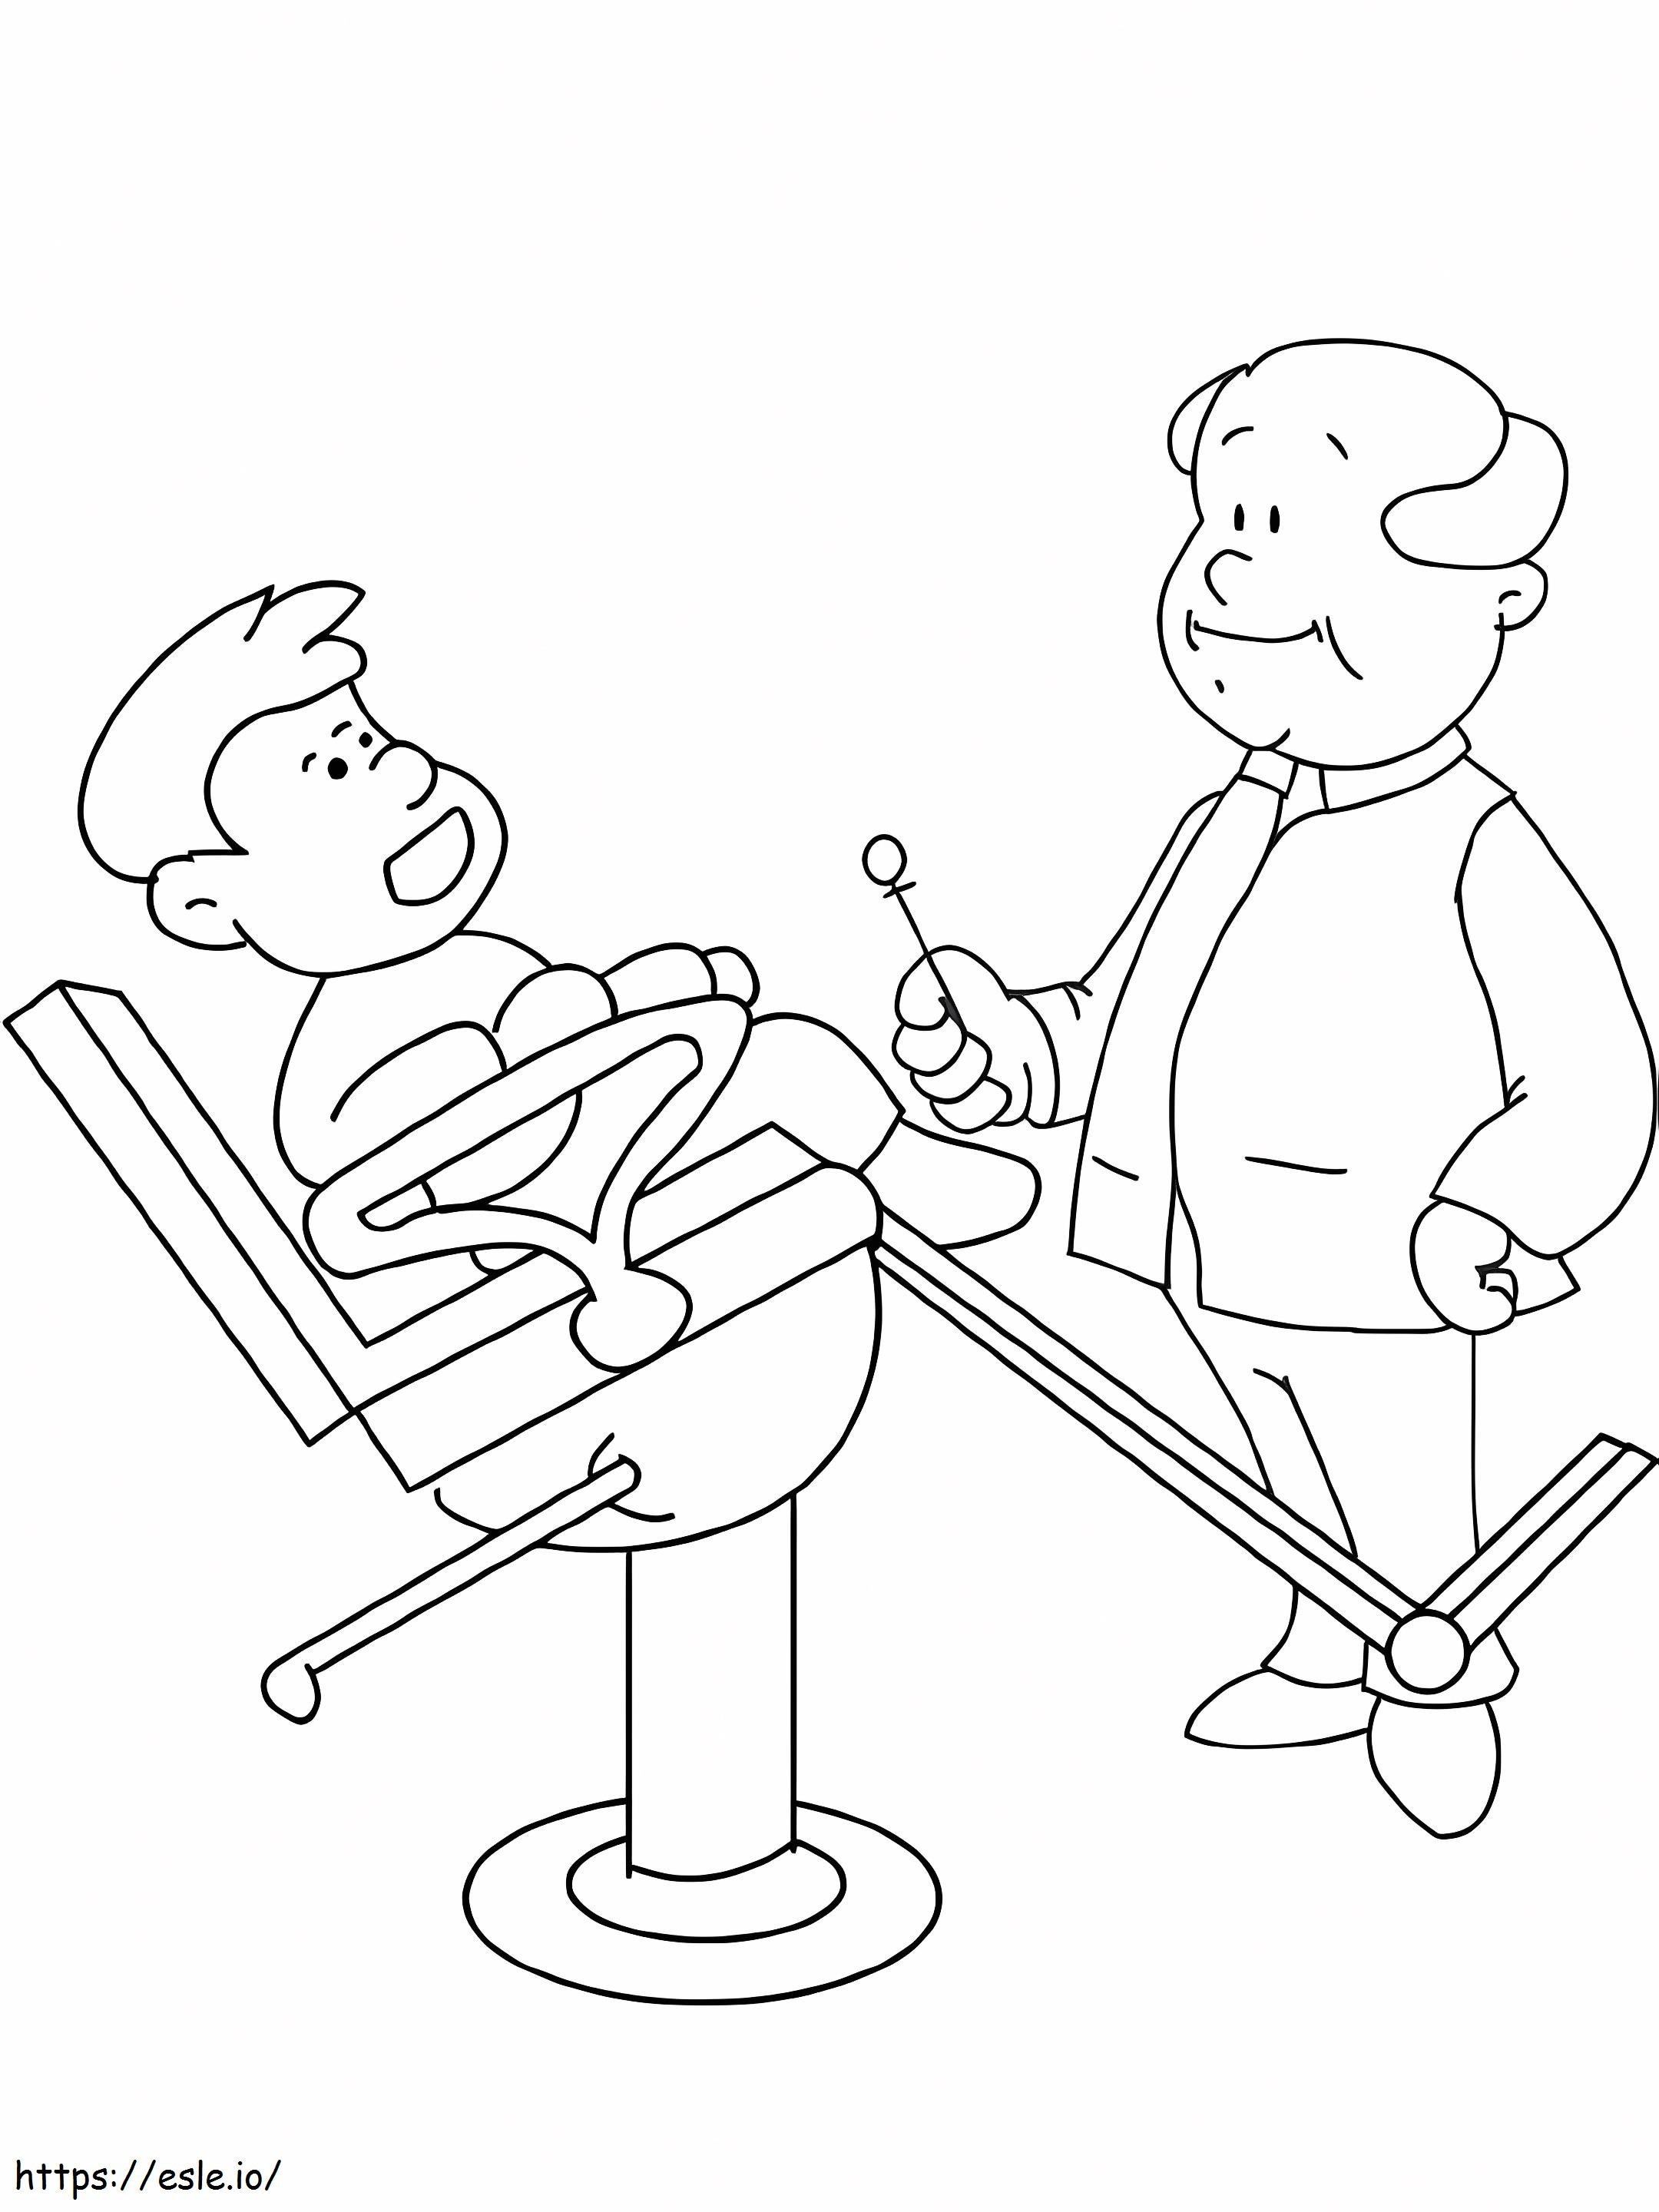 Dentist 3 coloring page